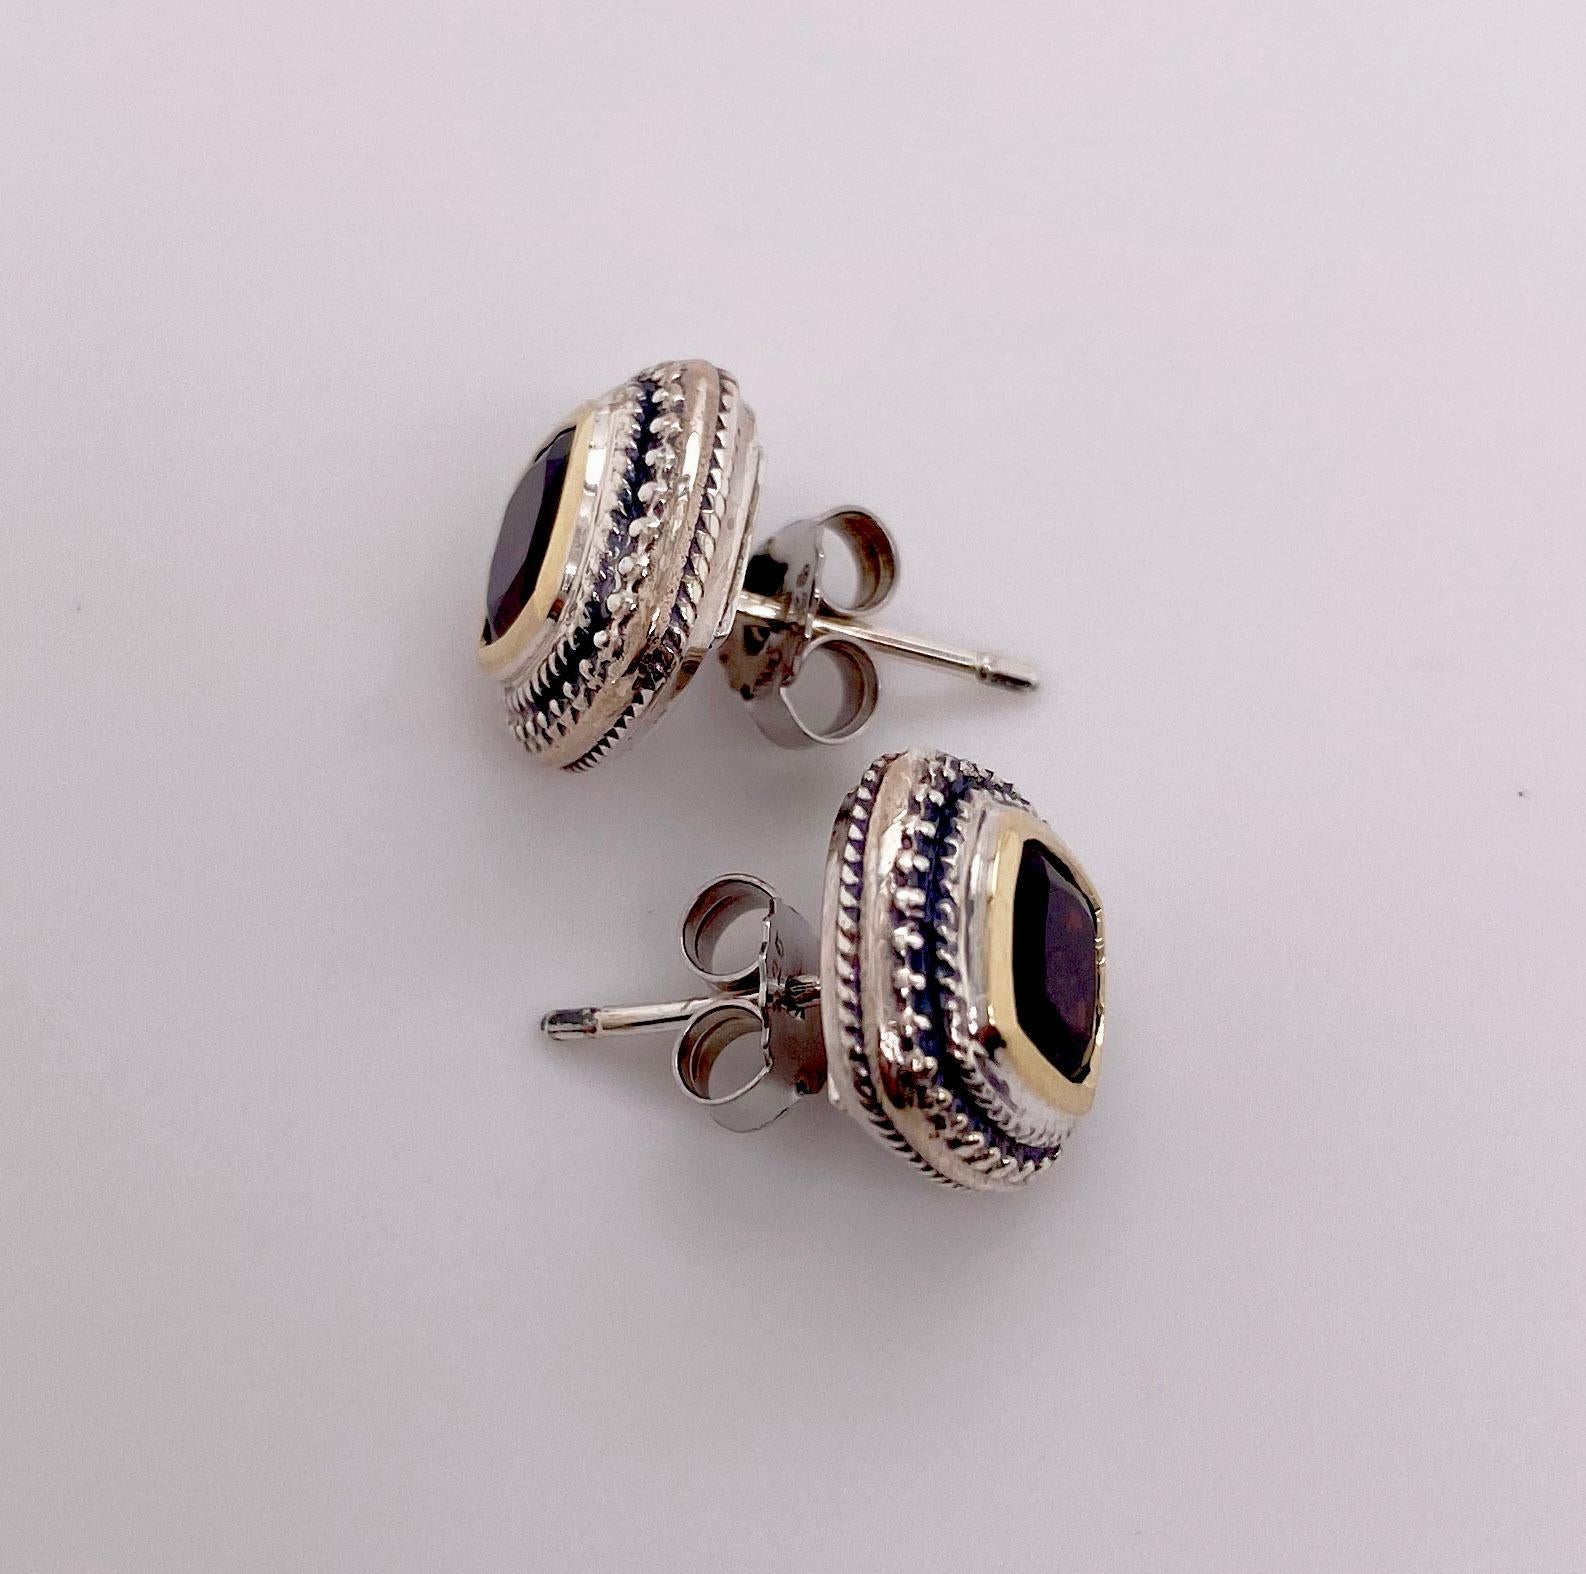 The details for these gorgeous earrings are listed below:
Metal Quality: Sterling Silver and 14 Karat Yellow Gold 
Earring Type: Stud 
Gemstone: Garnet 
Gemstone Weight: 1.7 ct 
Gemstone Color: Red 
Measurements: 11.1 mm X 11.1 mm 
Post Type: Stud